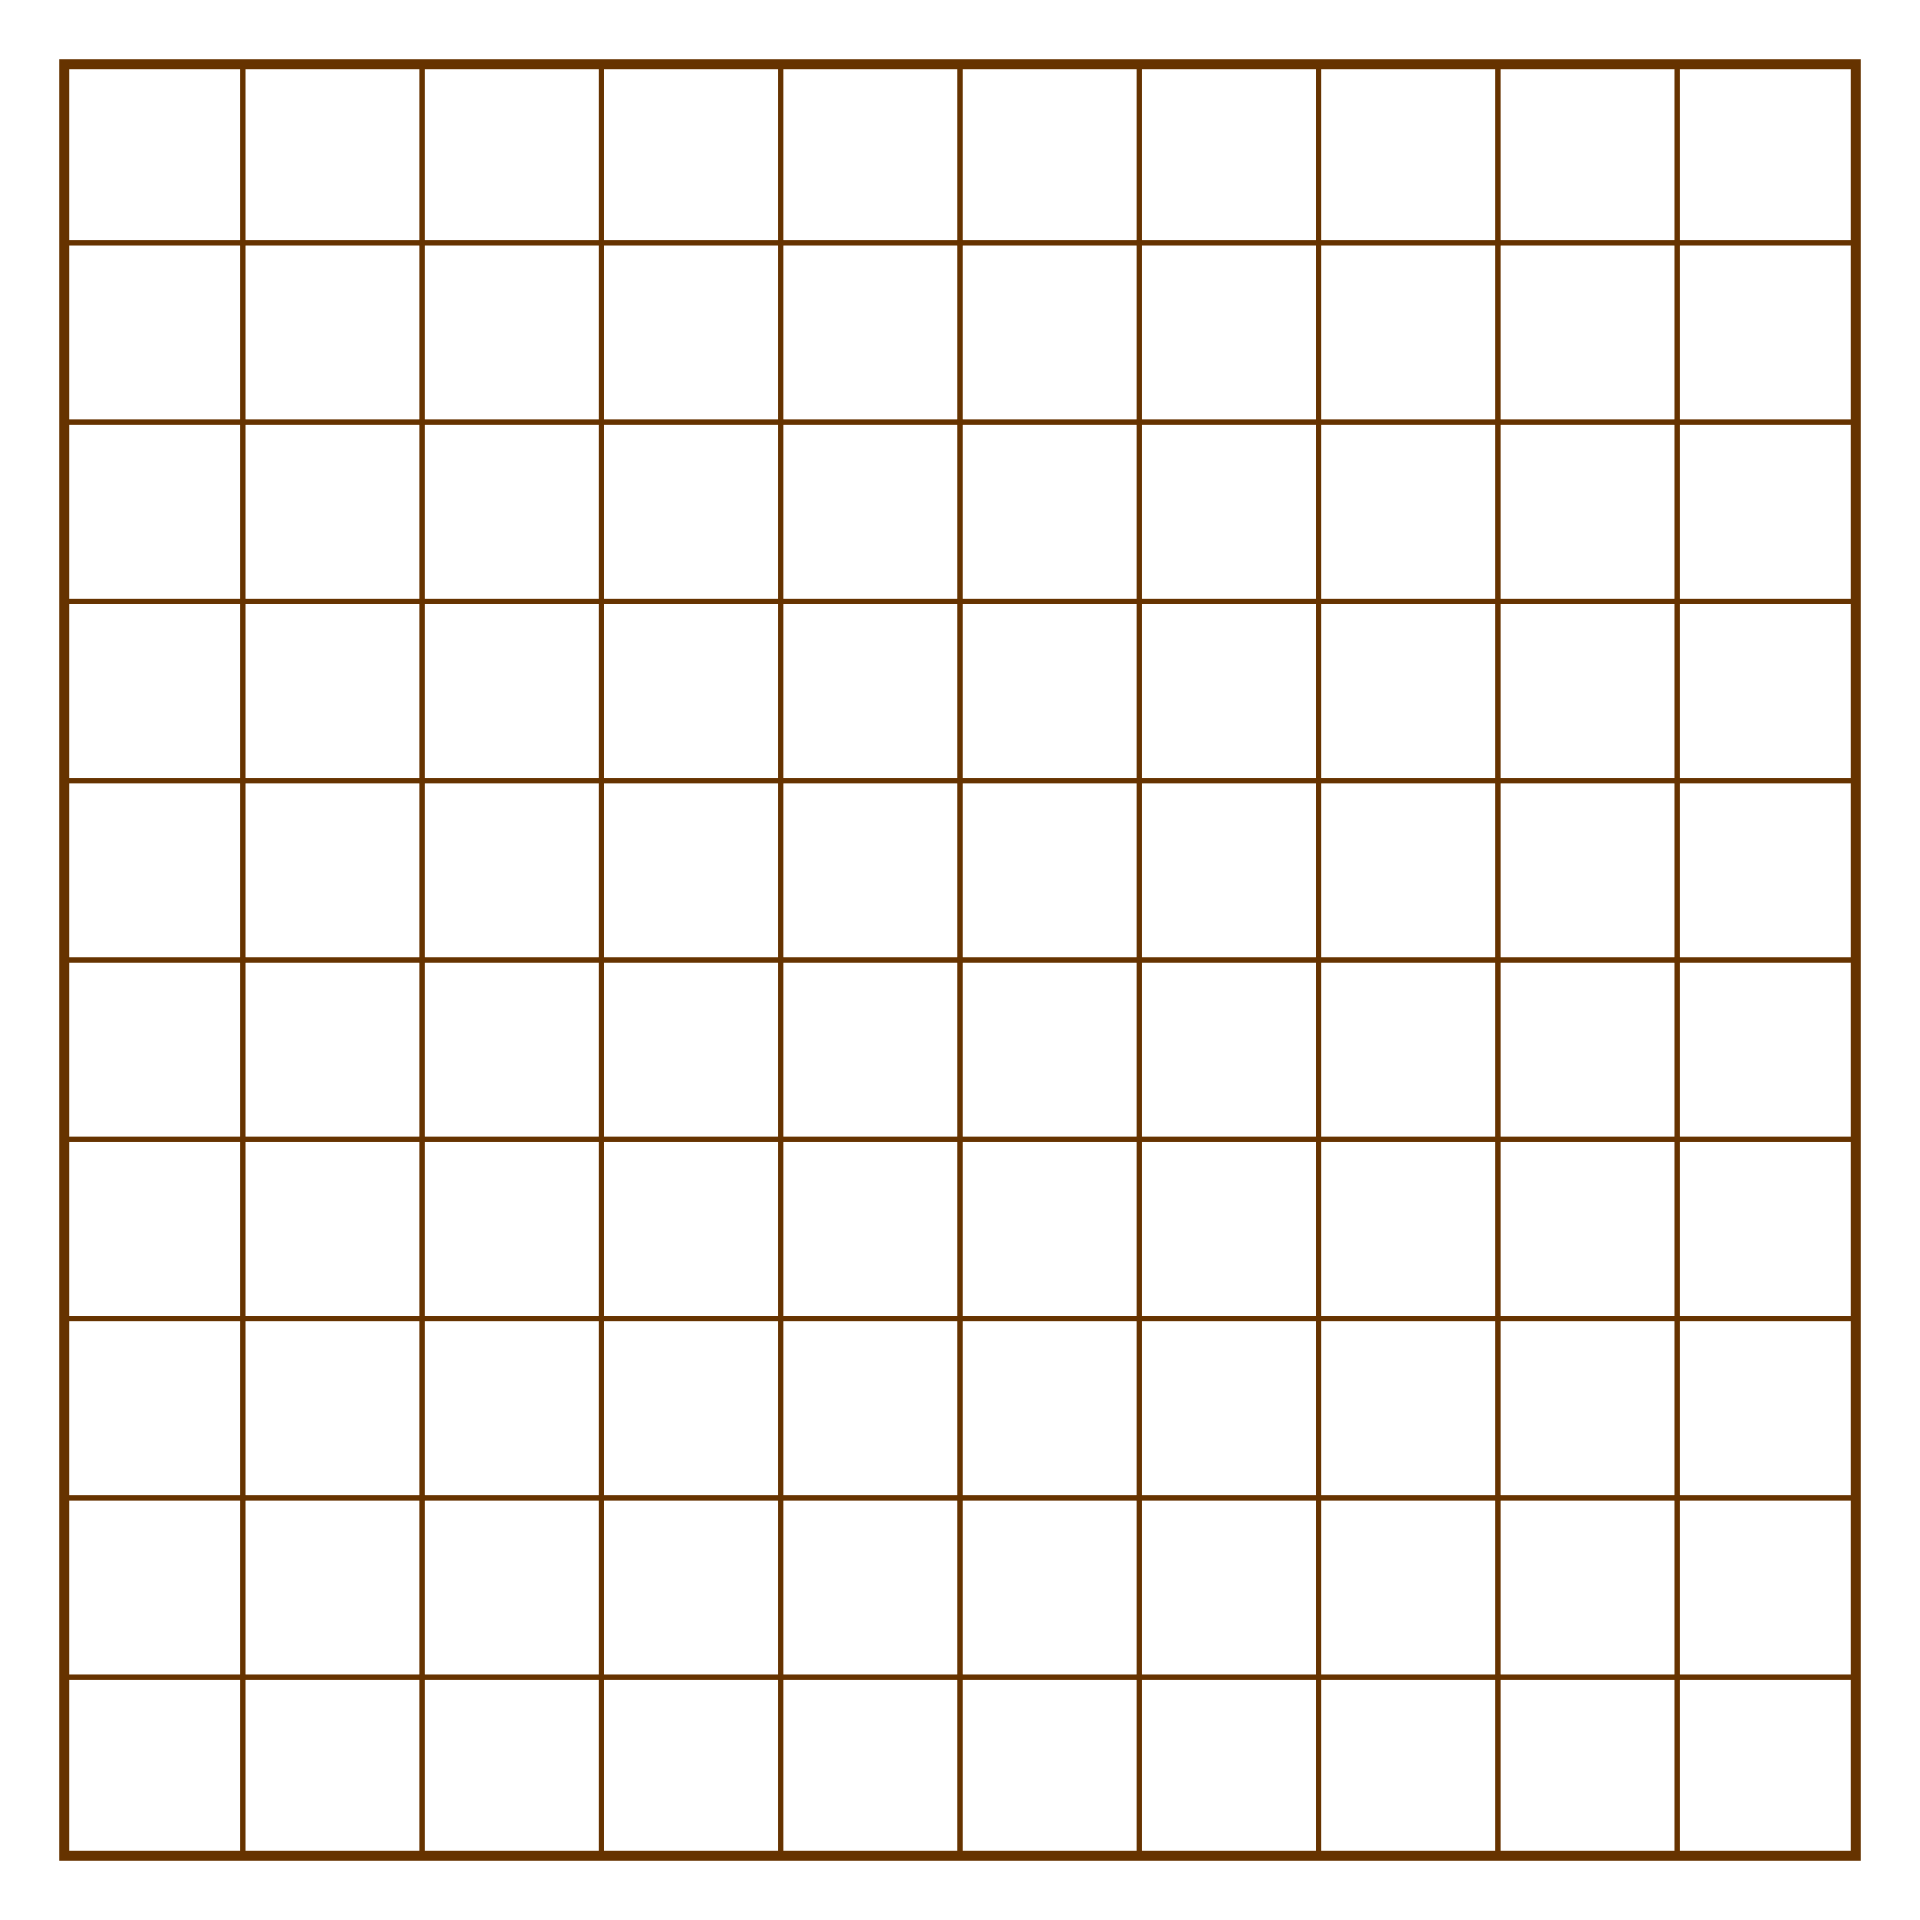 7-best-images-of-printable-grids-squares-printable-blank-100-square